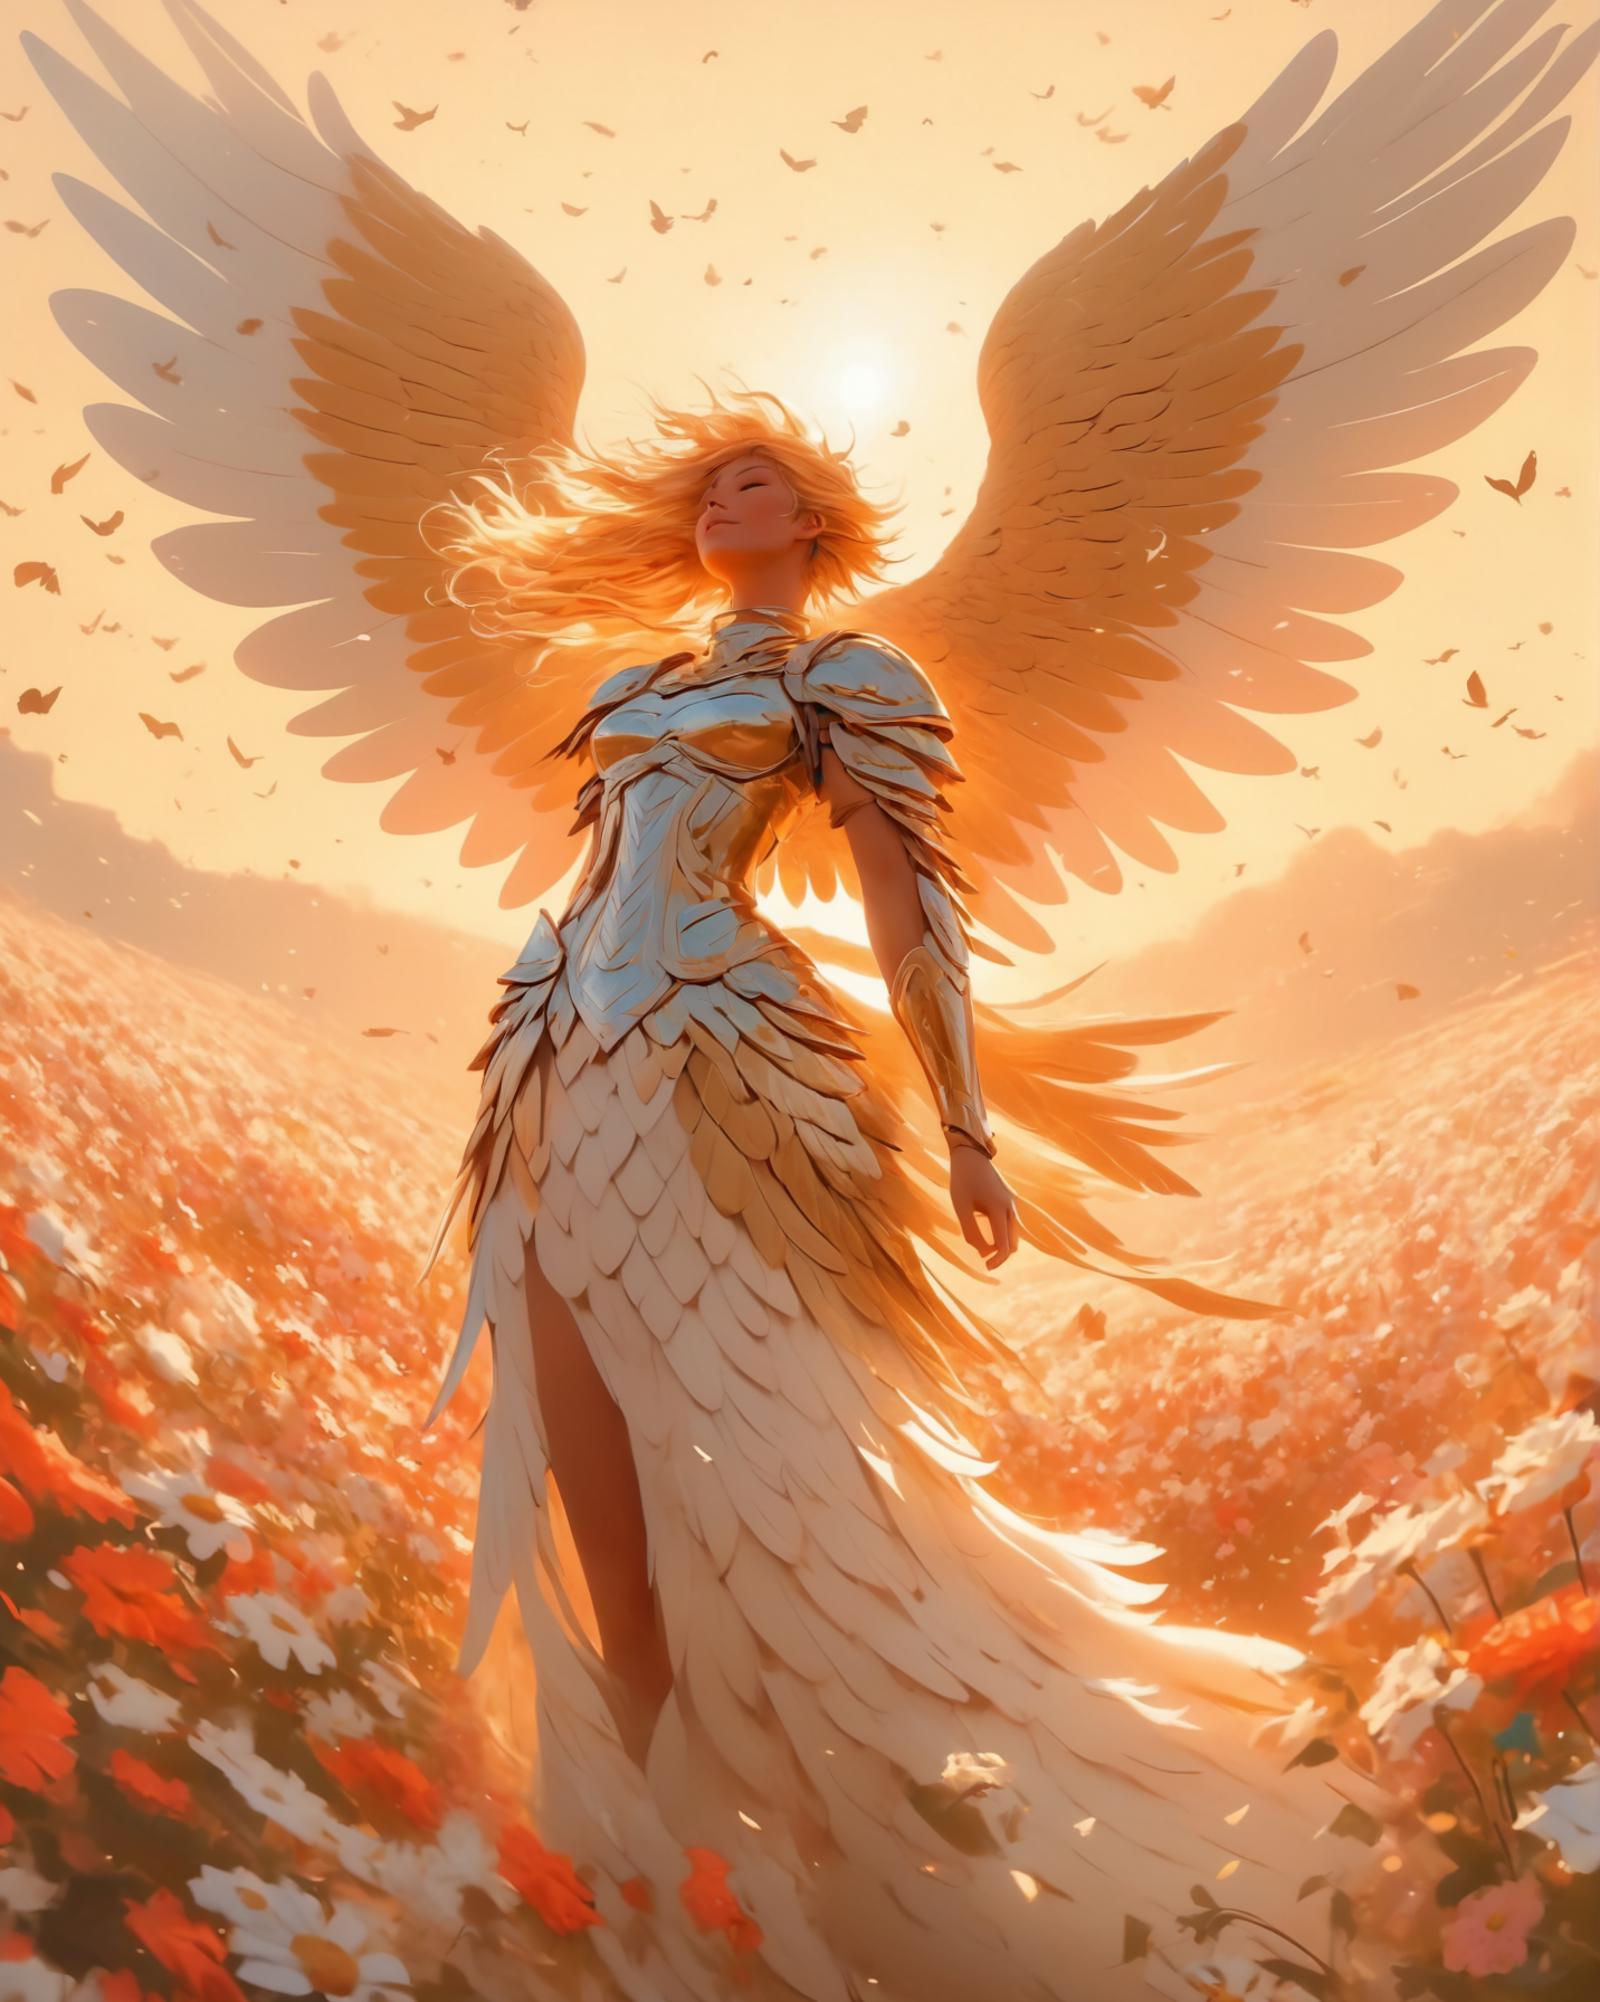 A beautiful angelic figure in a white dress with wings, standing in a field of flowers.